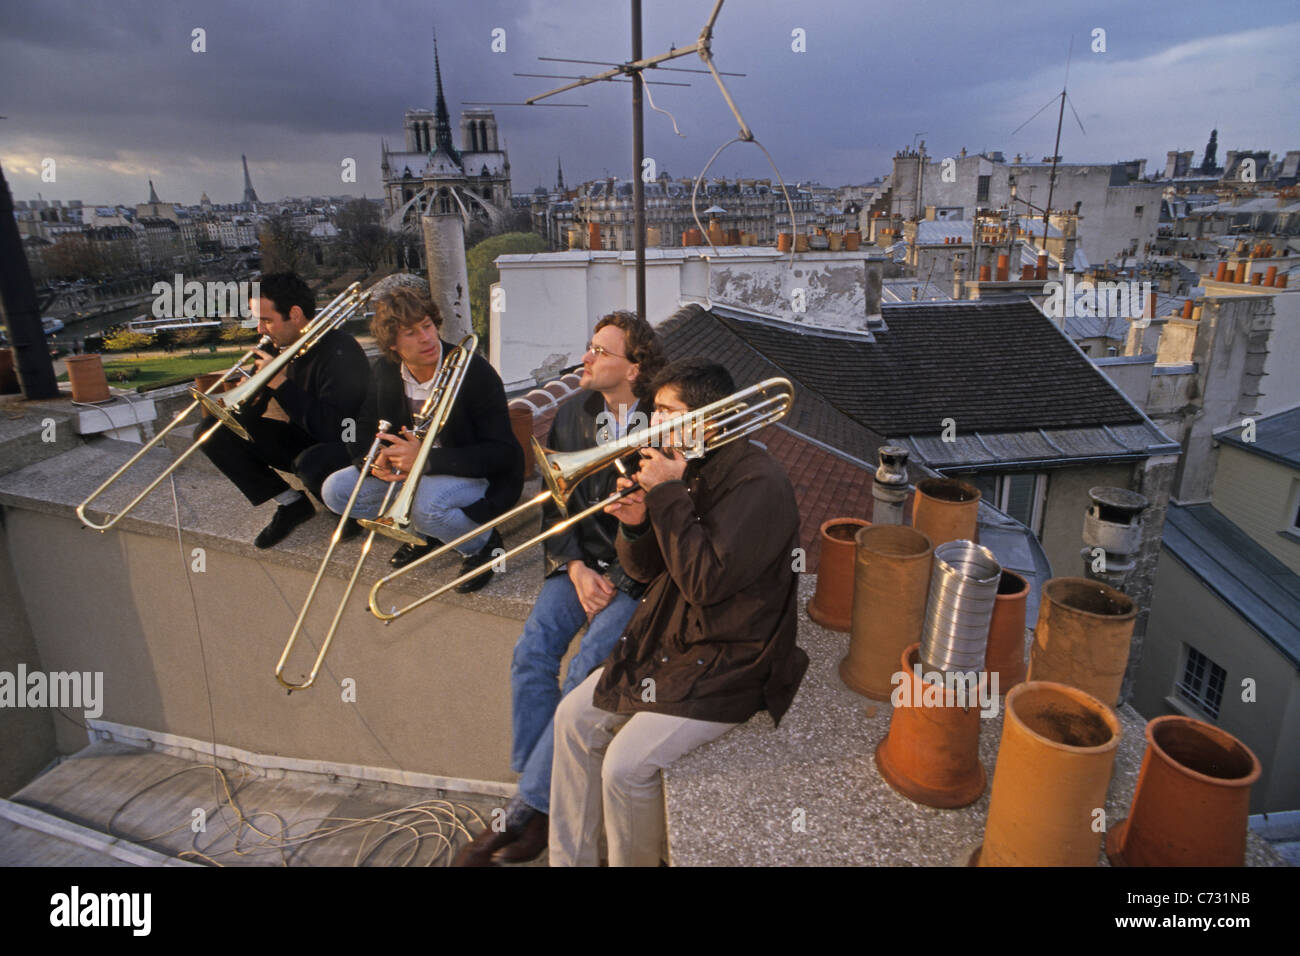 A group of musicians practicing on the roof, 1e Arrondissement Paris, France Stock Photo